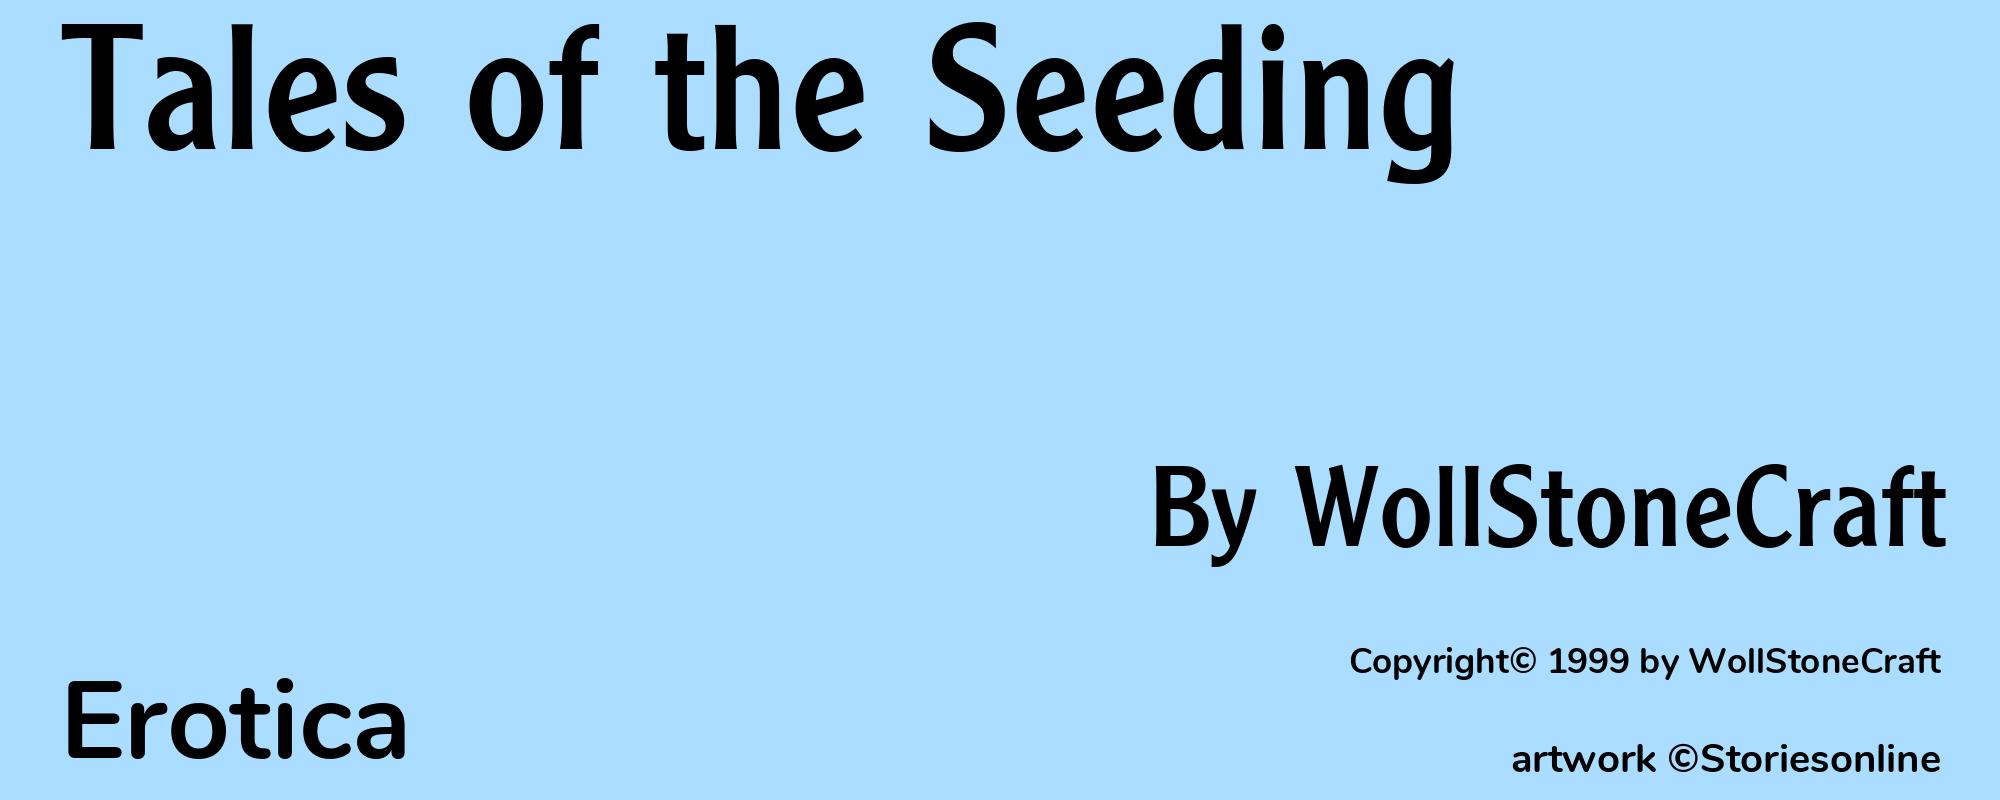 Tales of the Seeding - Cover